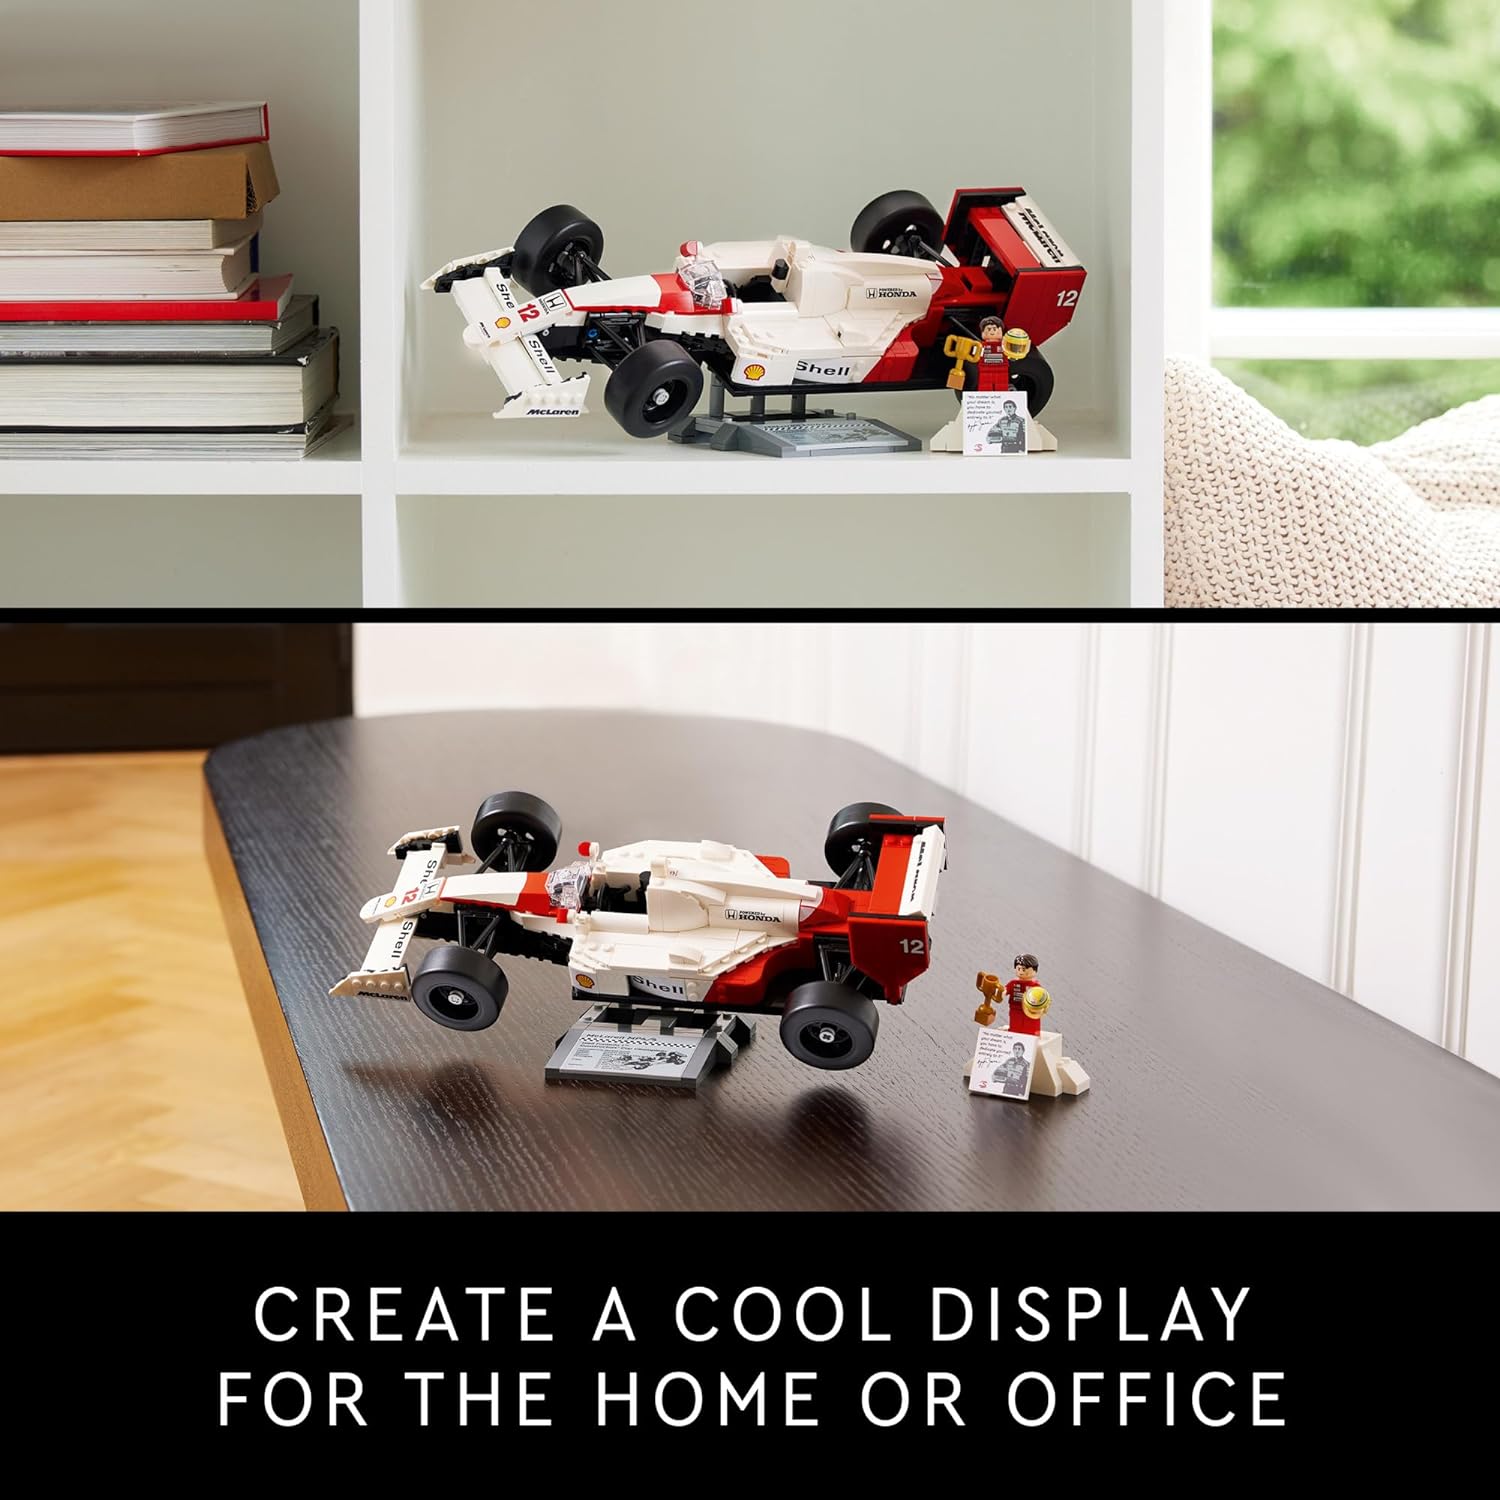 LEGO 10330 Icons McLaren MP4/4 & Ayrton Senna Minifigure, Holiday or Birthday Gift Idea for Home Office Decor, F1 Building Set for Adults and Fans of Cool Model Race Cars.